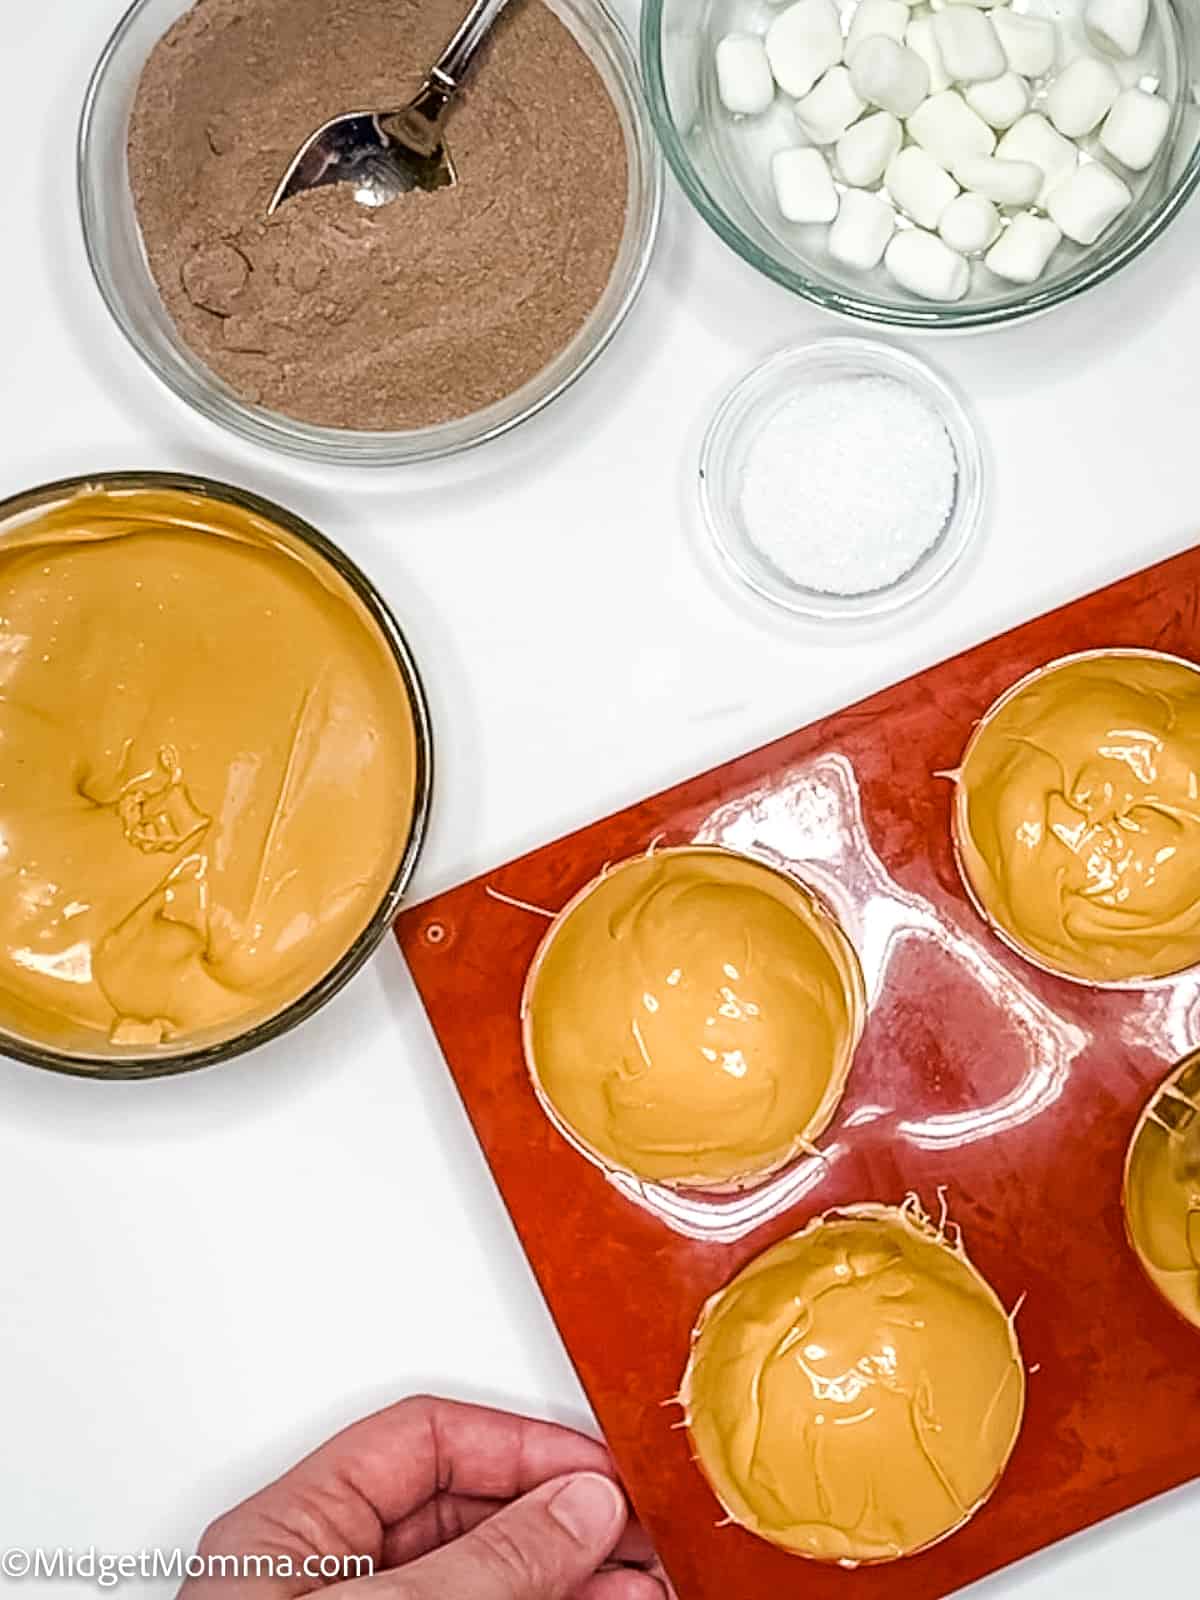 melted caramel candy melts being spooned into sphere molds